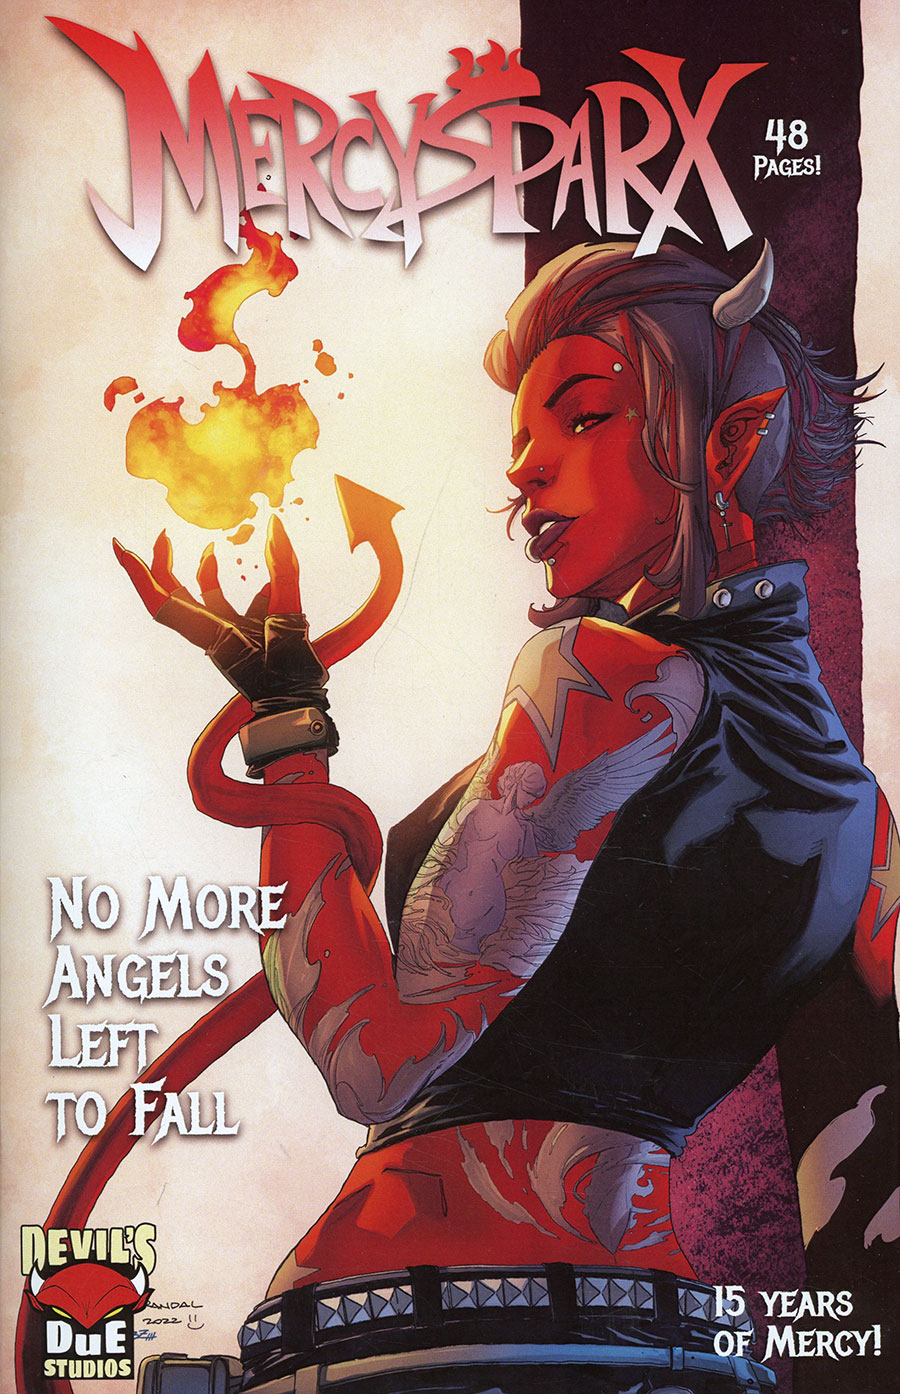 Mercy Sparx No More Angels Left To Fall #1 (One Shot) Cover B Variant Von Randal Cover